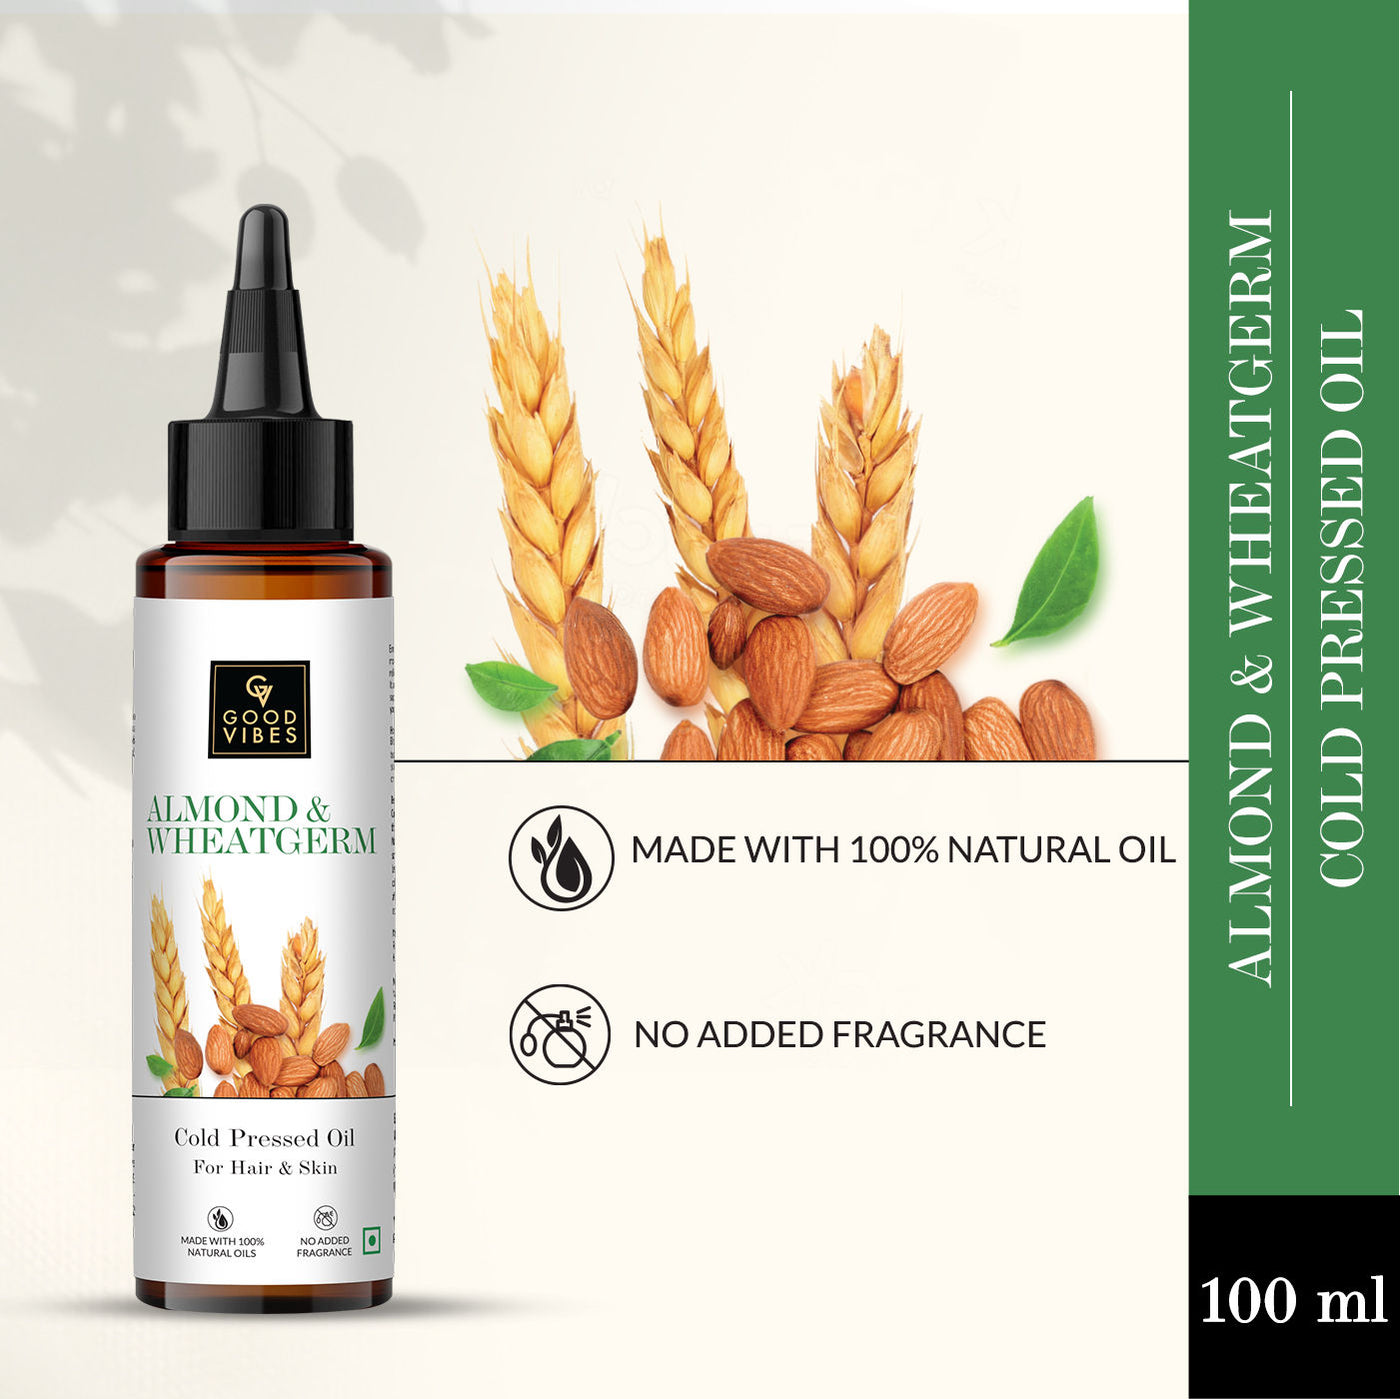 Good Vibes Almond And Wheatgerm Cold Pressed Oil For Hair & Skin (100ml) - 2